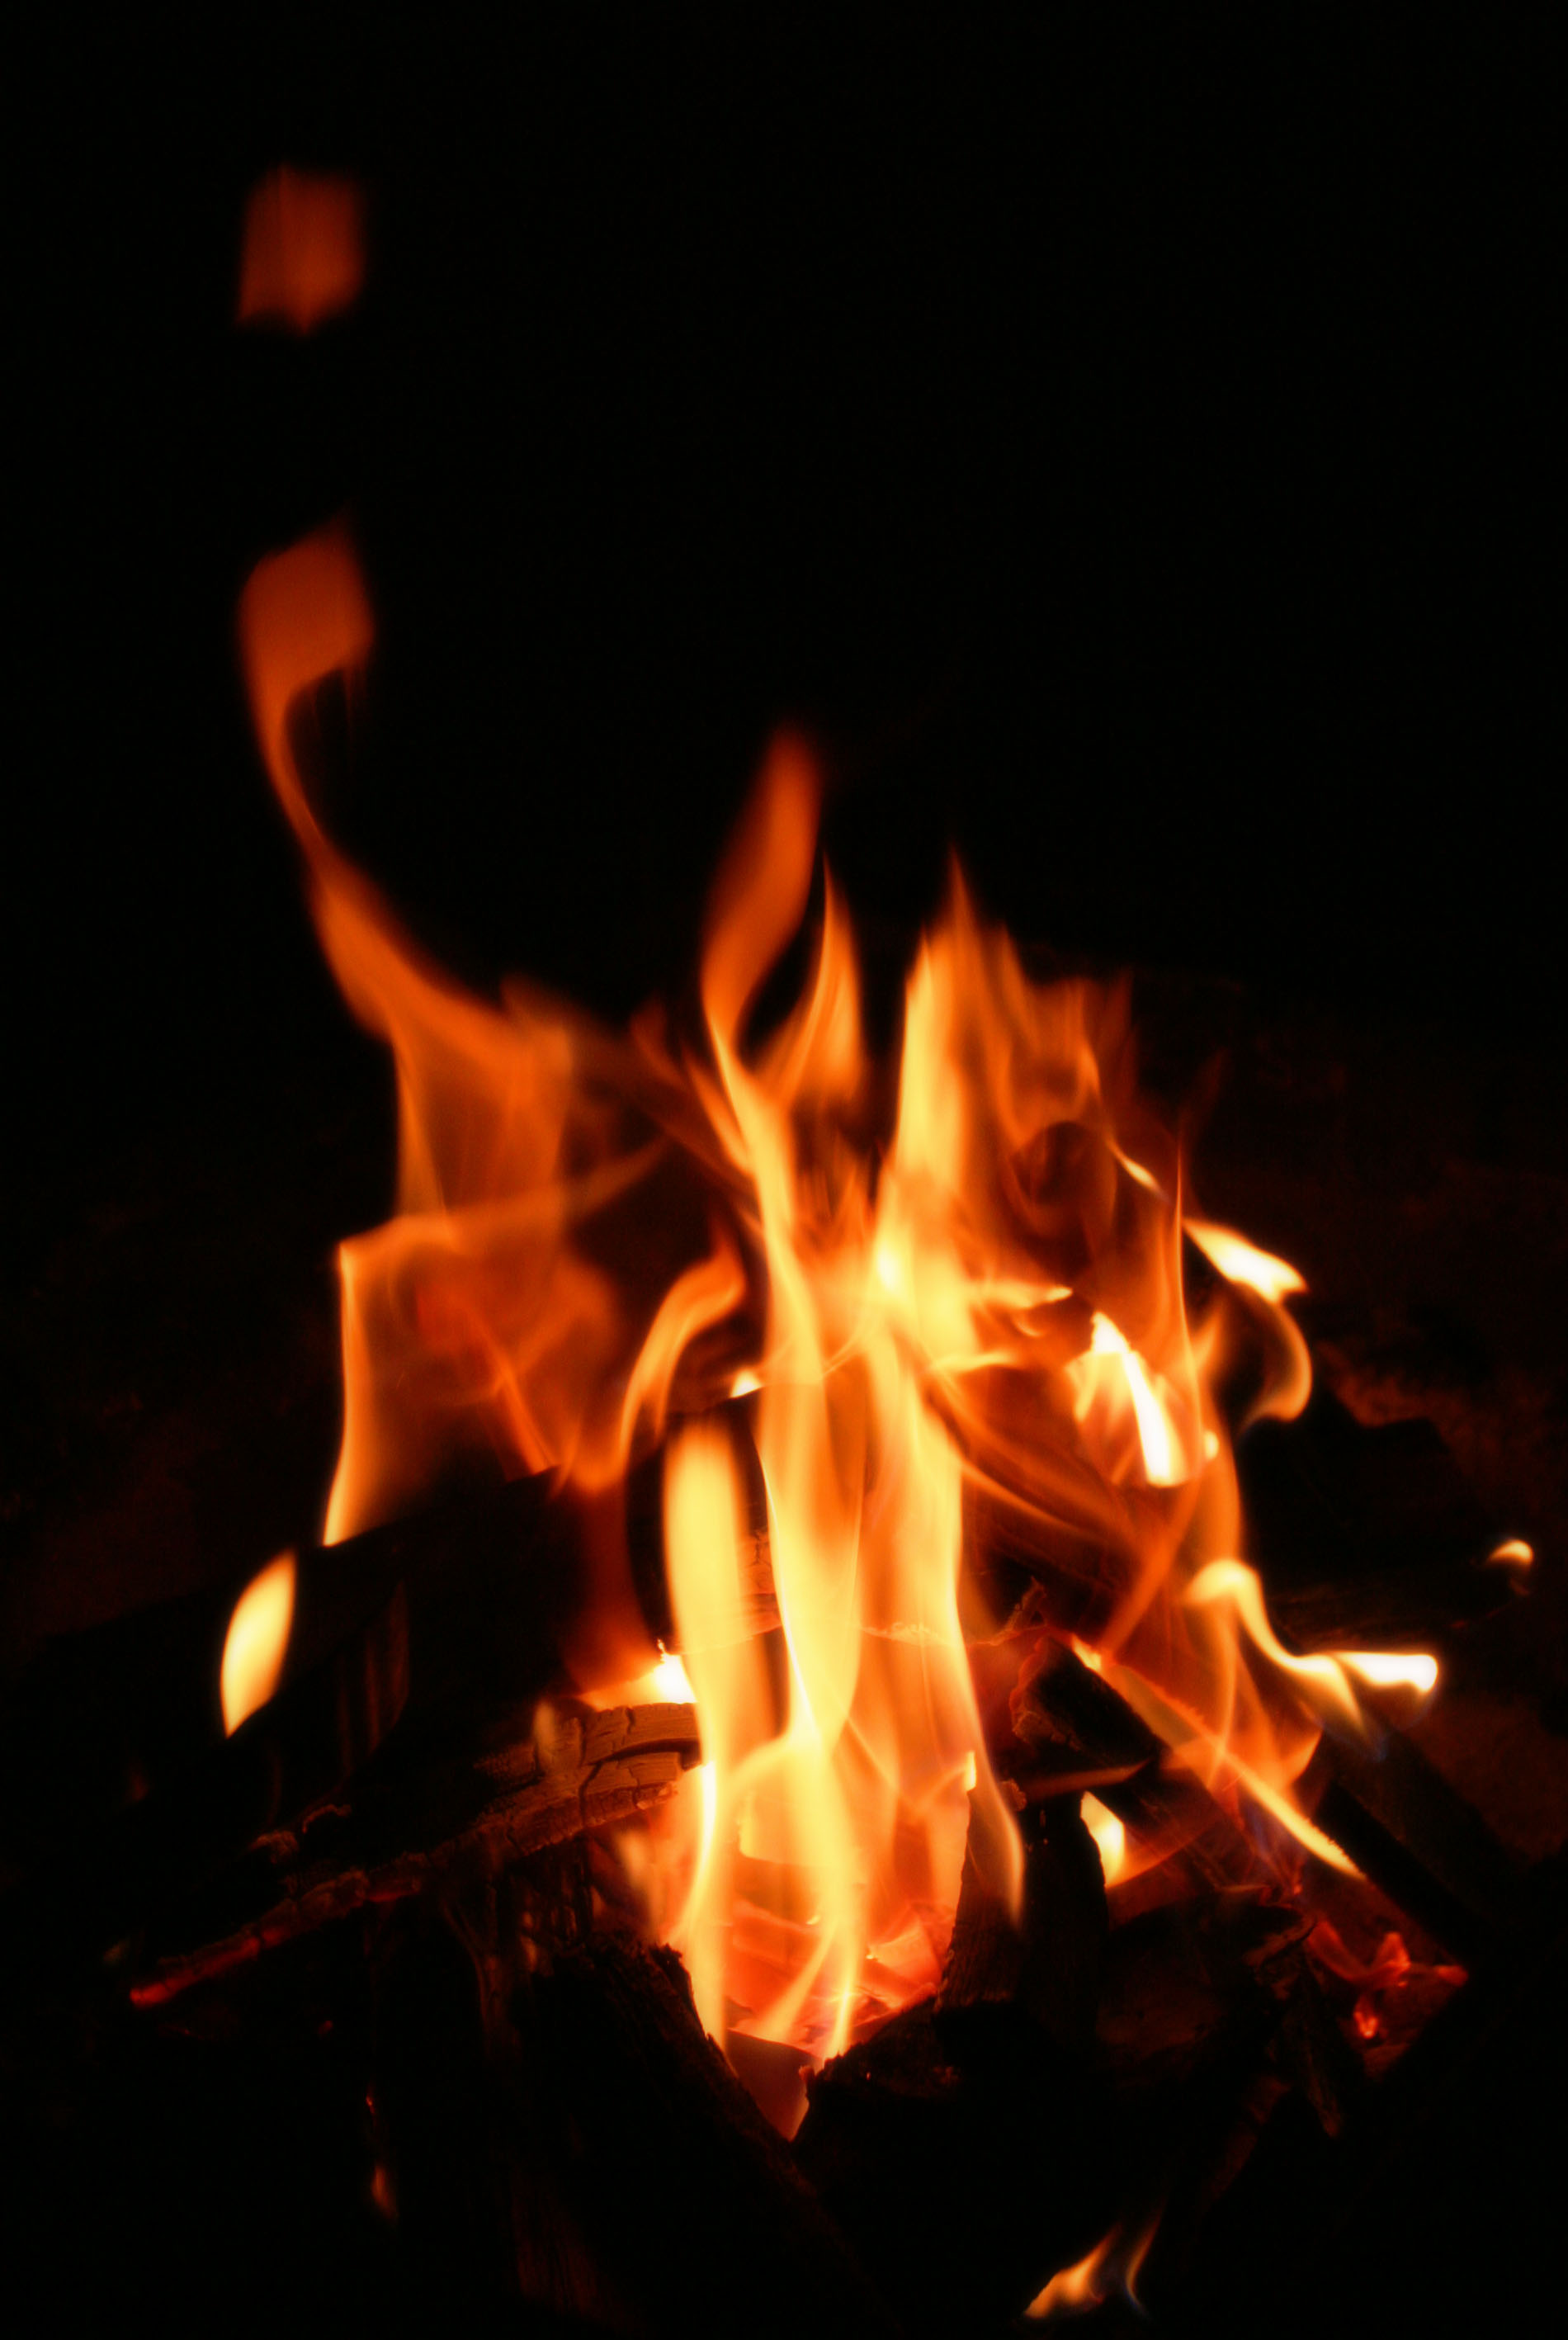 photo,material,free,landscape,picture,stock photo,Creative Commons,Flaring flames, bonfire, fire, firewood, burning